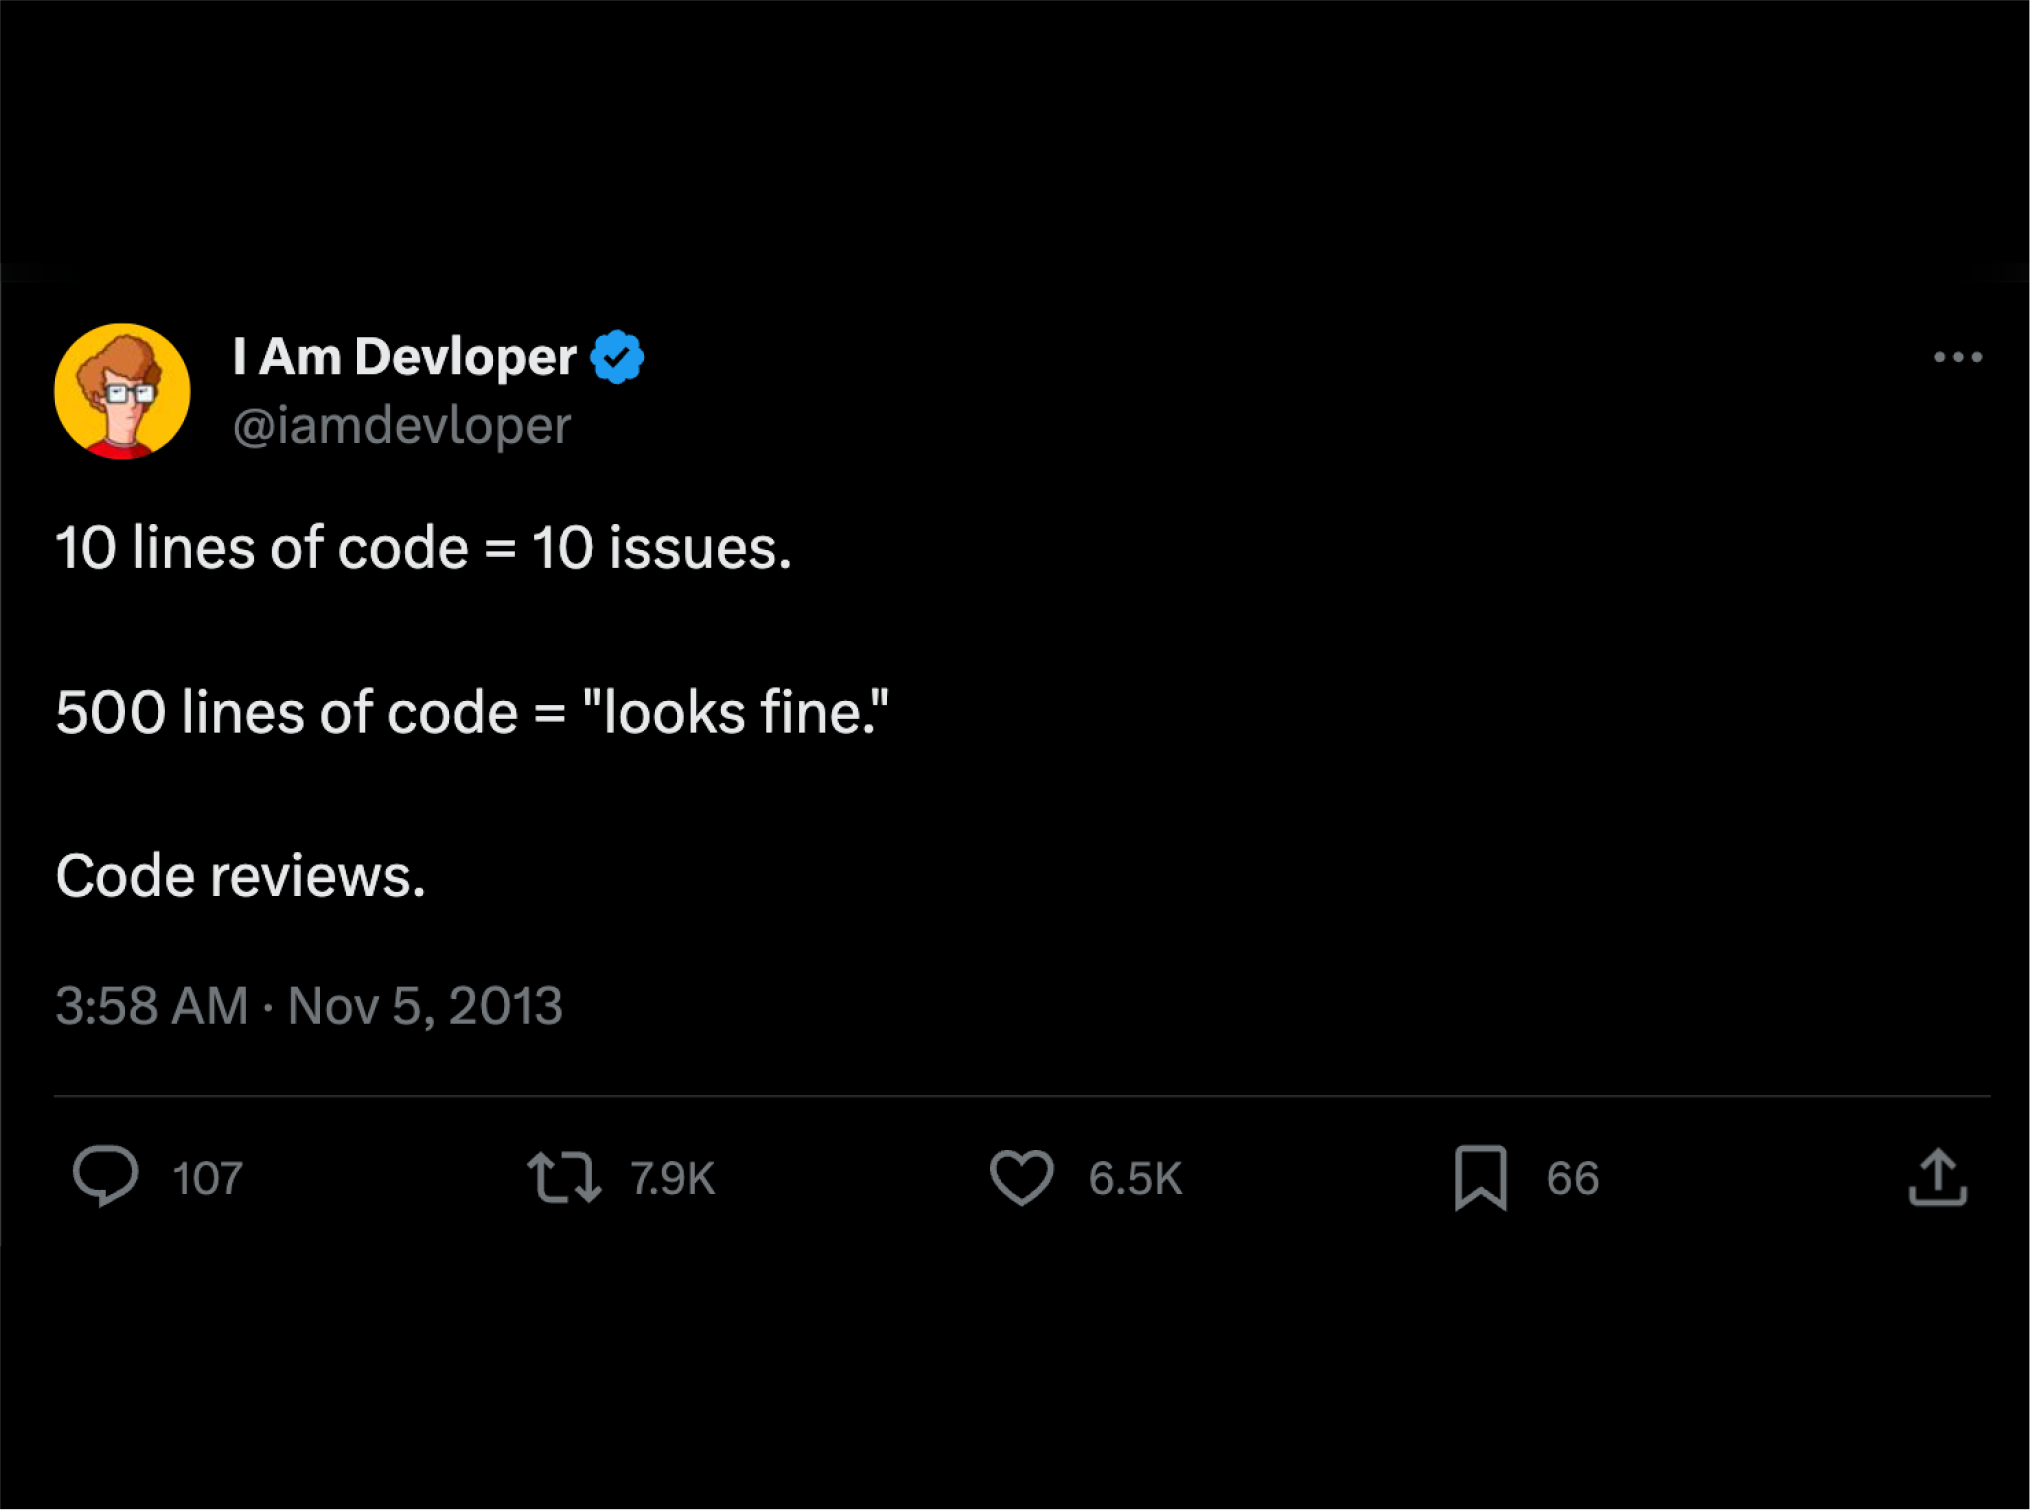 10 lines of code = 10 issues